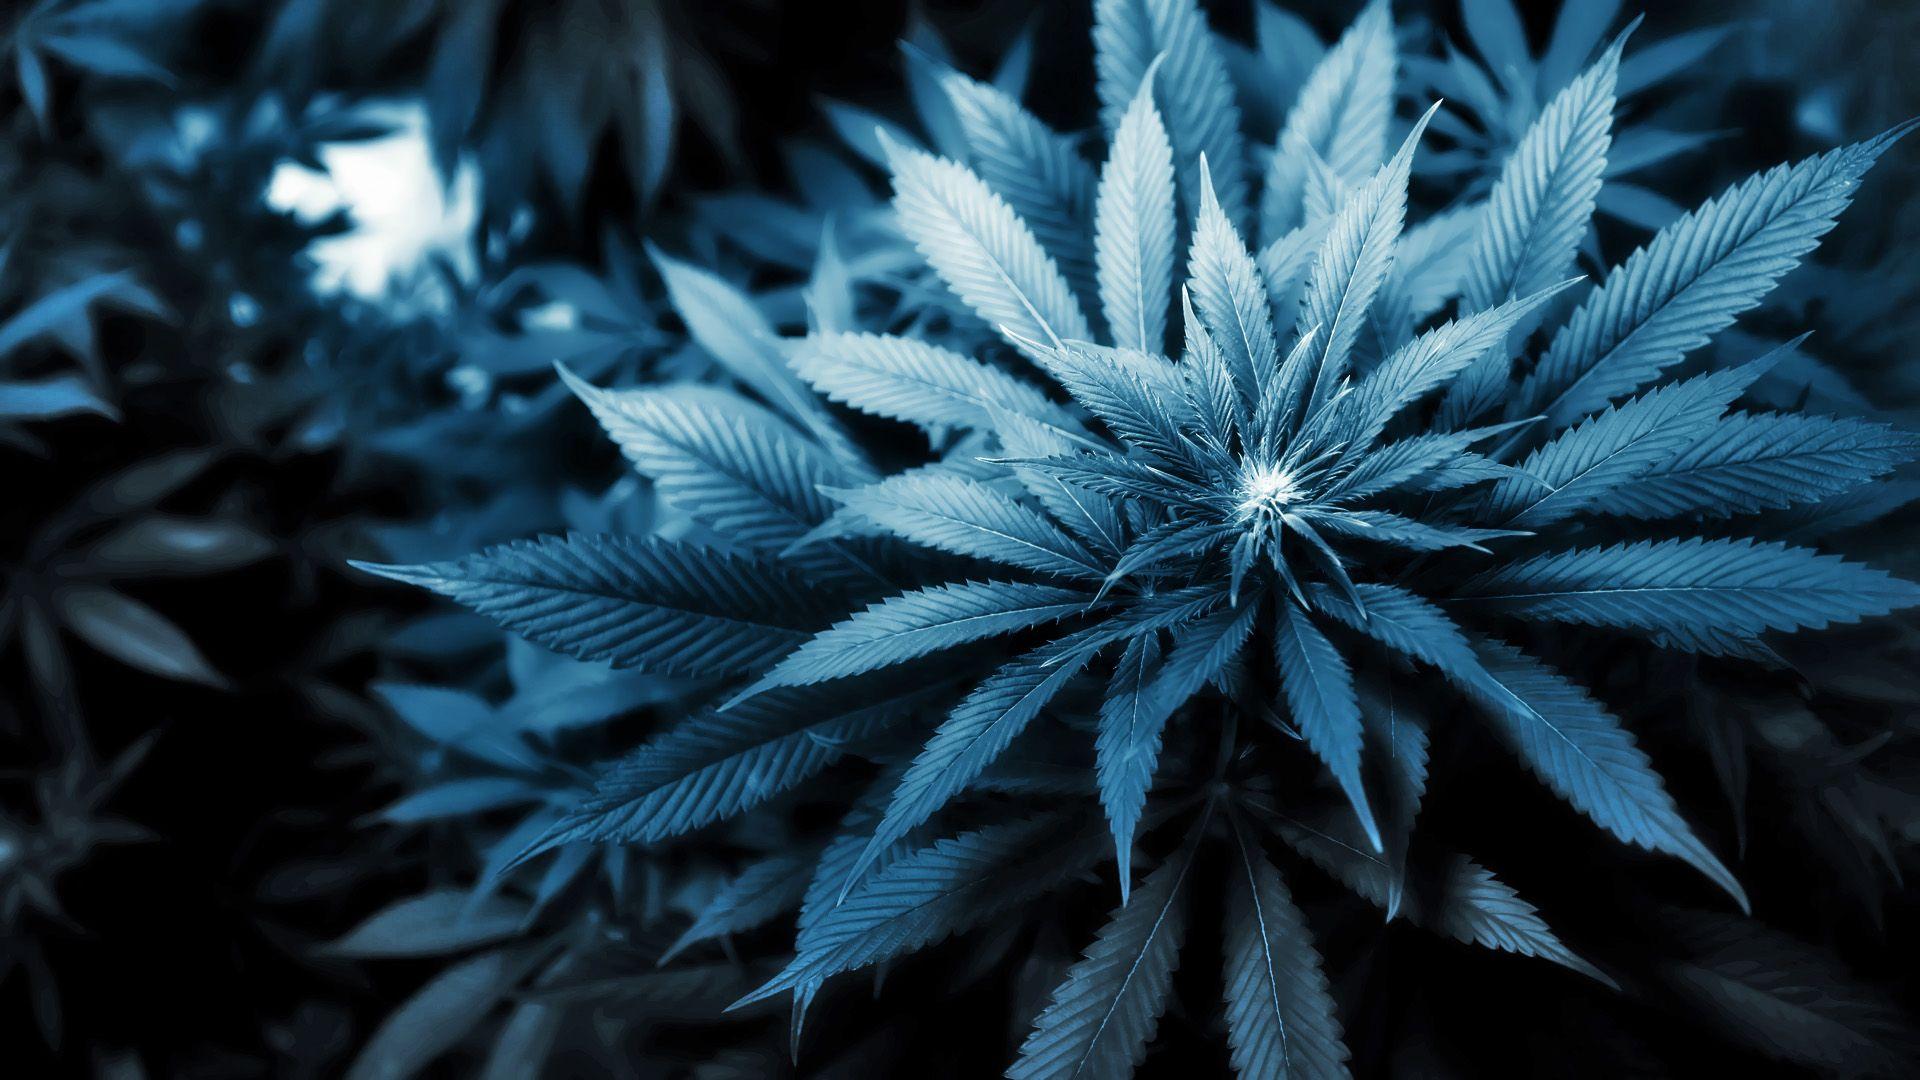 Cool Weed Wallpaper